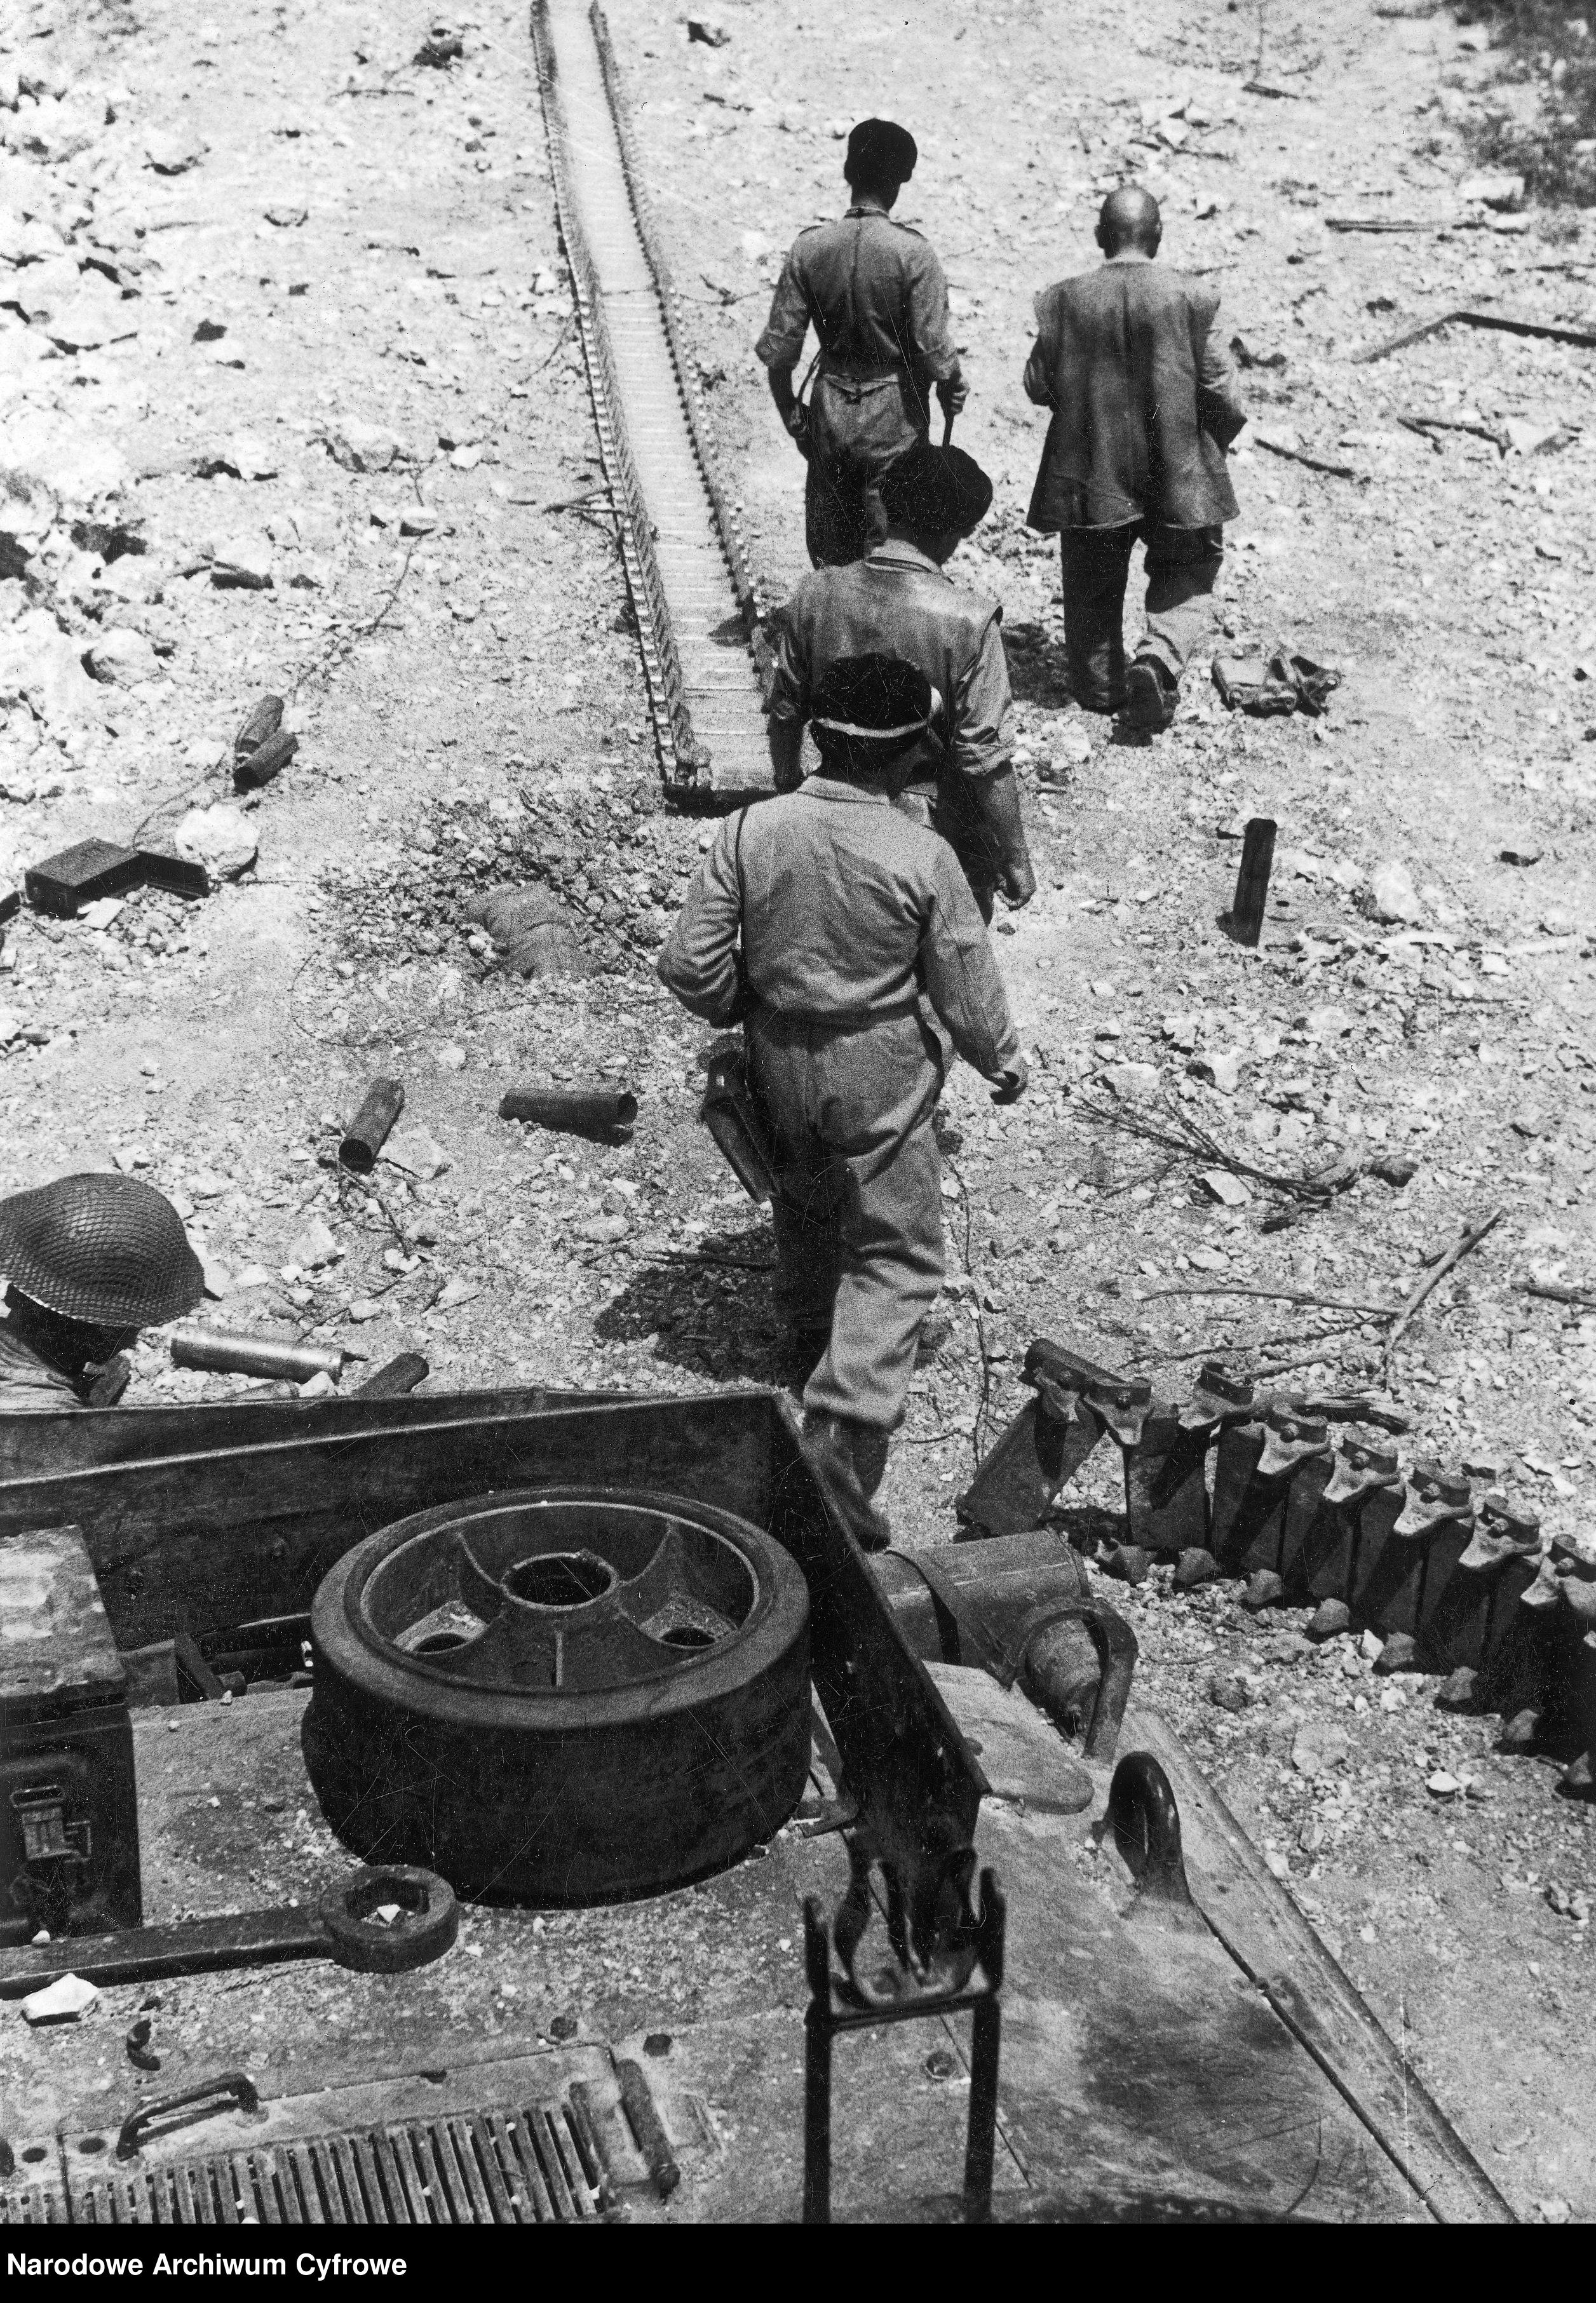 <p class='eng'>1944/05/24 - 1944/05/25<br />Soldiers replacing a broken track on the M4 Sherman tank. General Bronisław Rakowski (on the left) and Lt. Col. Władysław Bobiński (on the right) are walking side by side.<br />NAC 3/24/0/-/459/7</p>